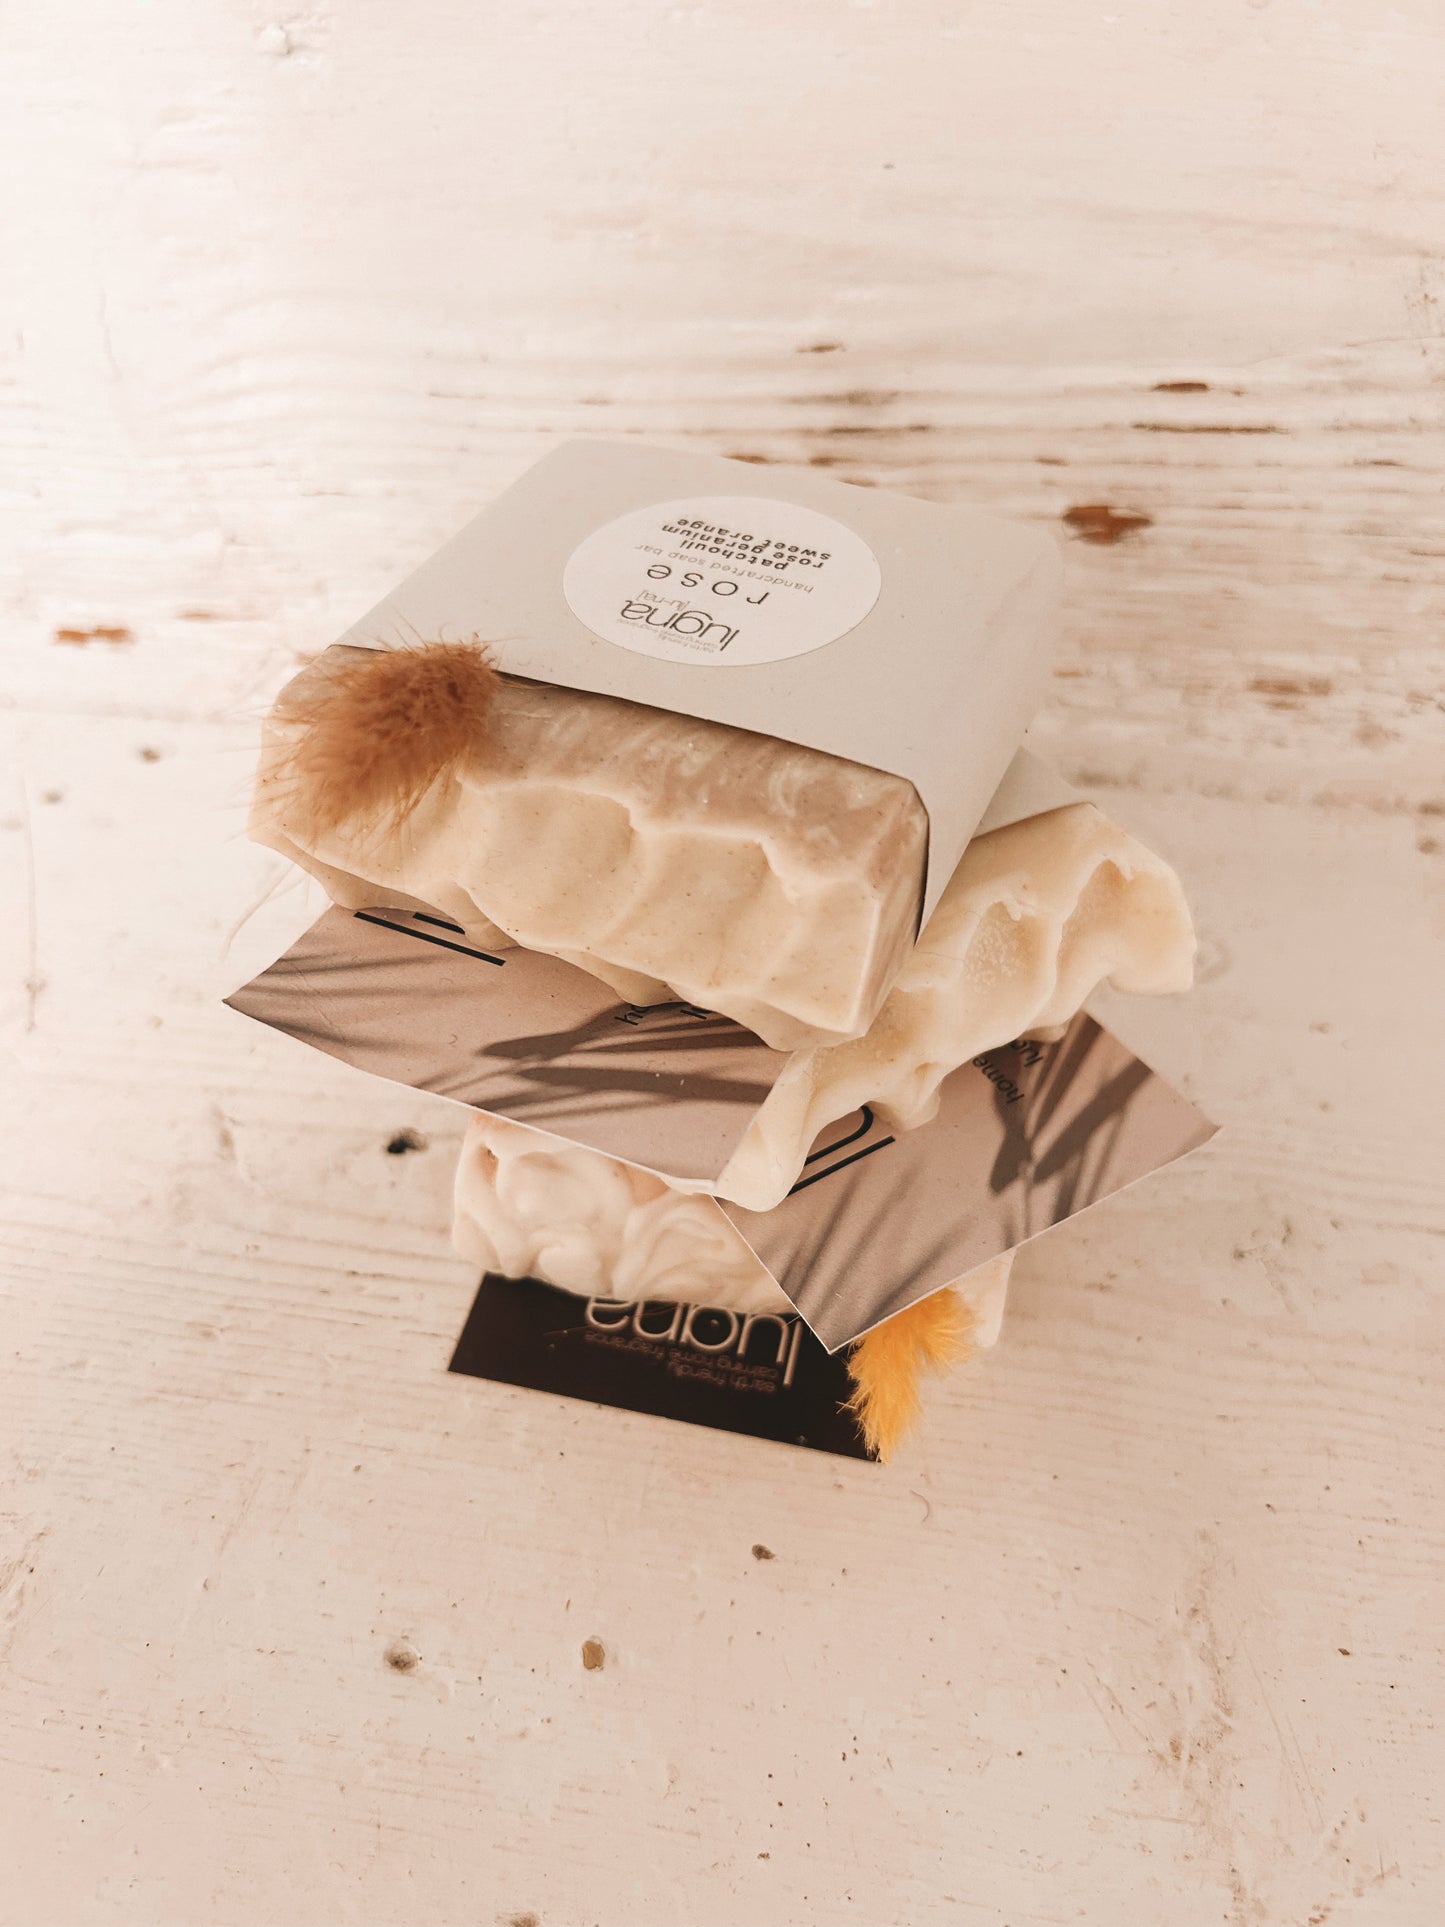 breathe handcrafted soap bar